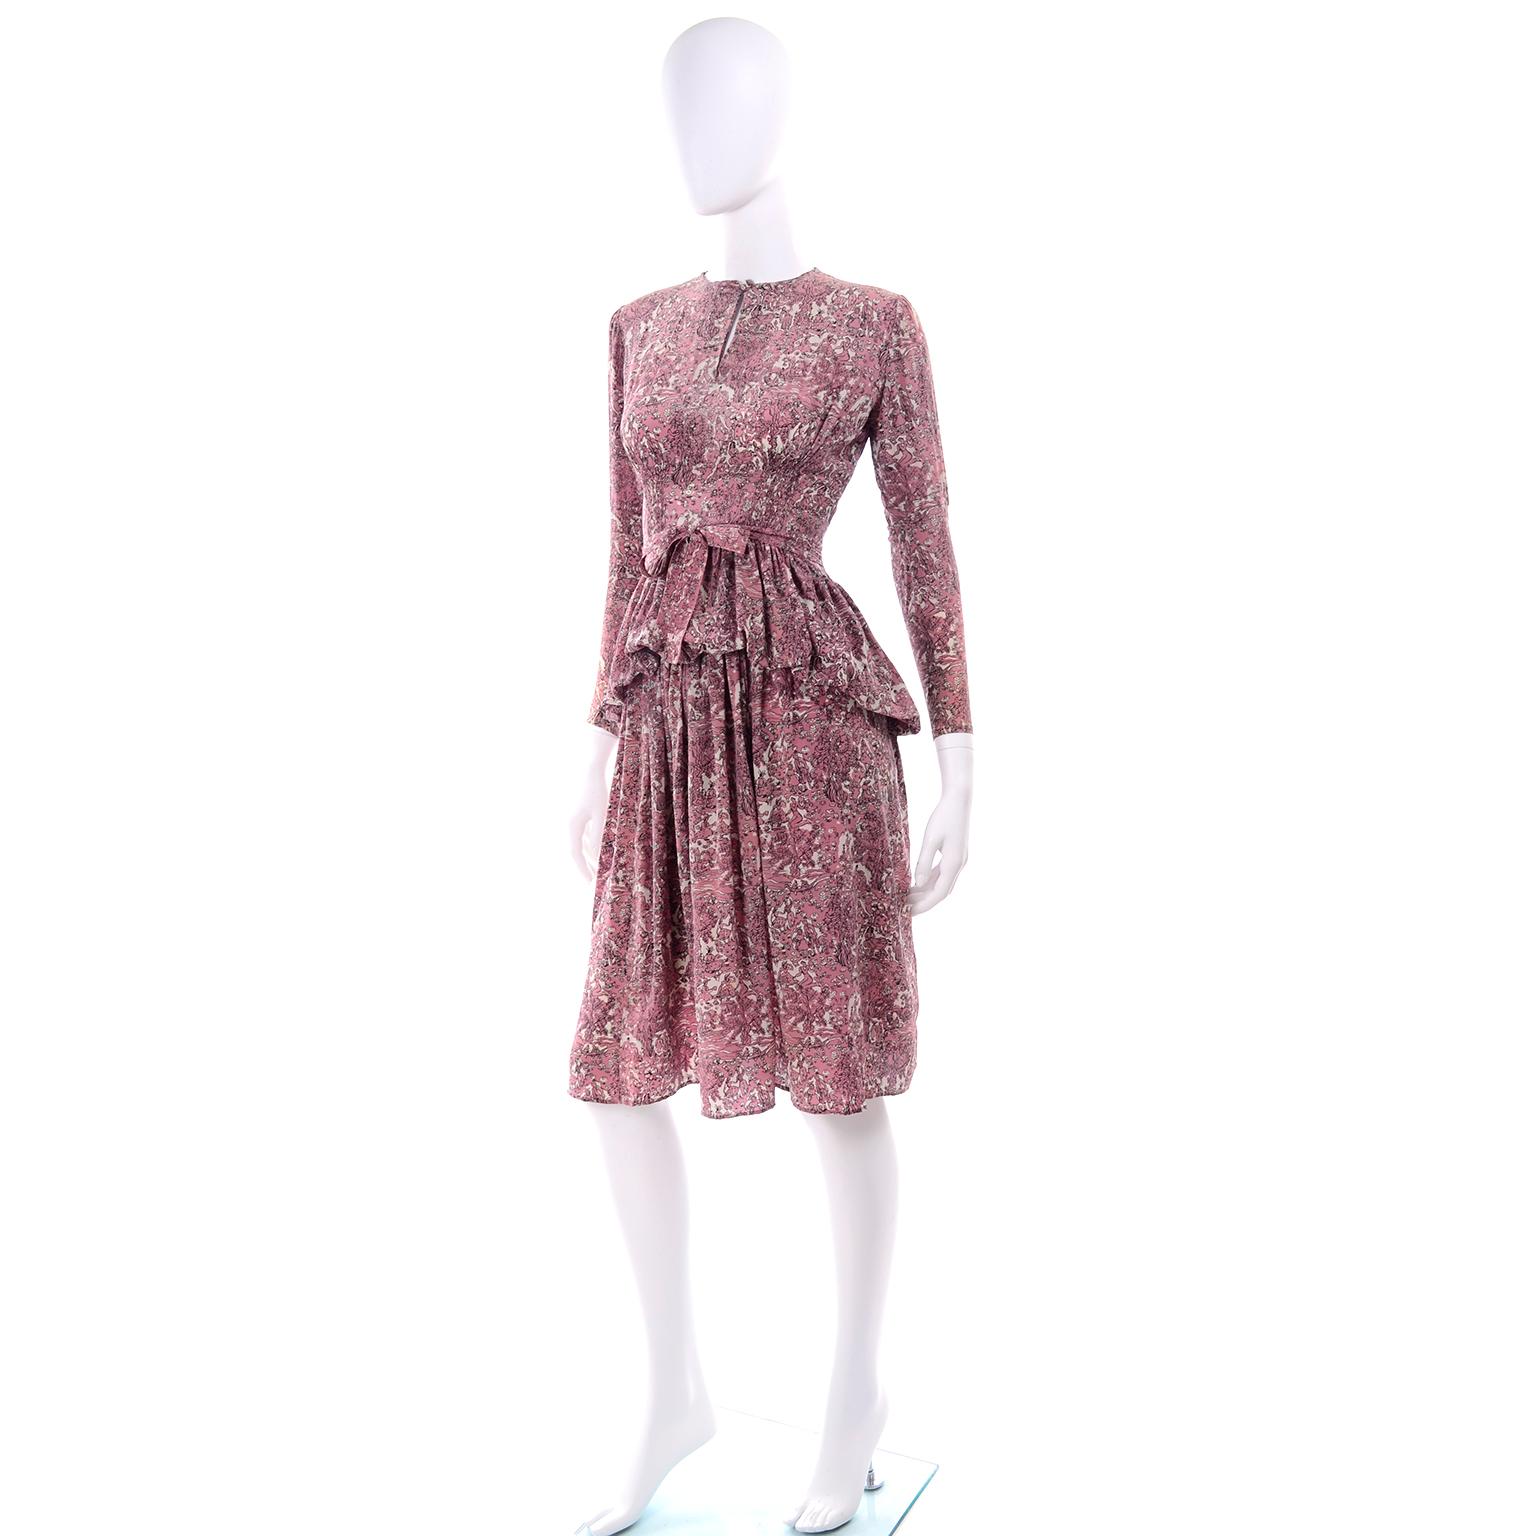 1940s Vintage Silk Dress in Rose Mauve Toile Novelty Print with Peplum 1